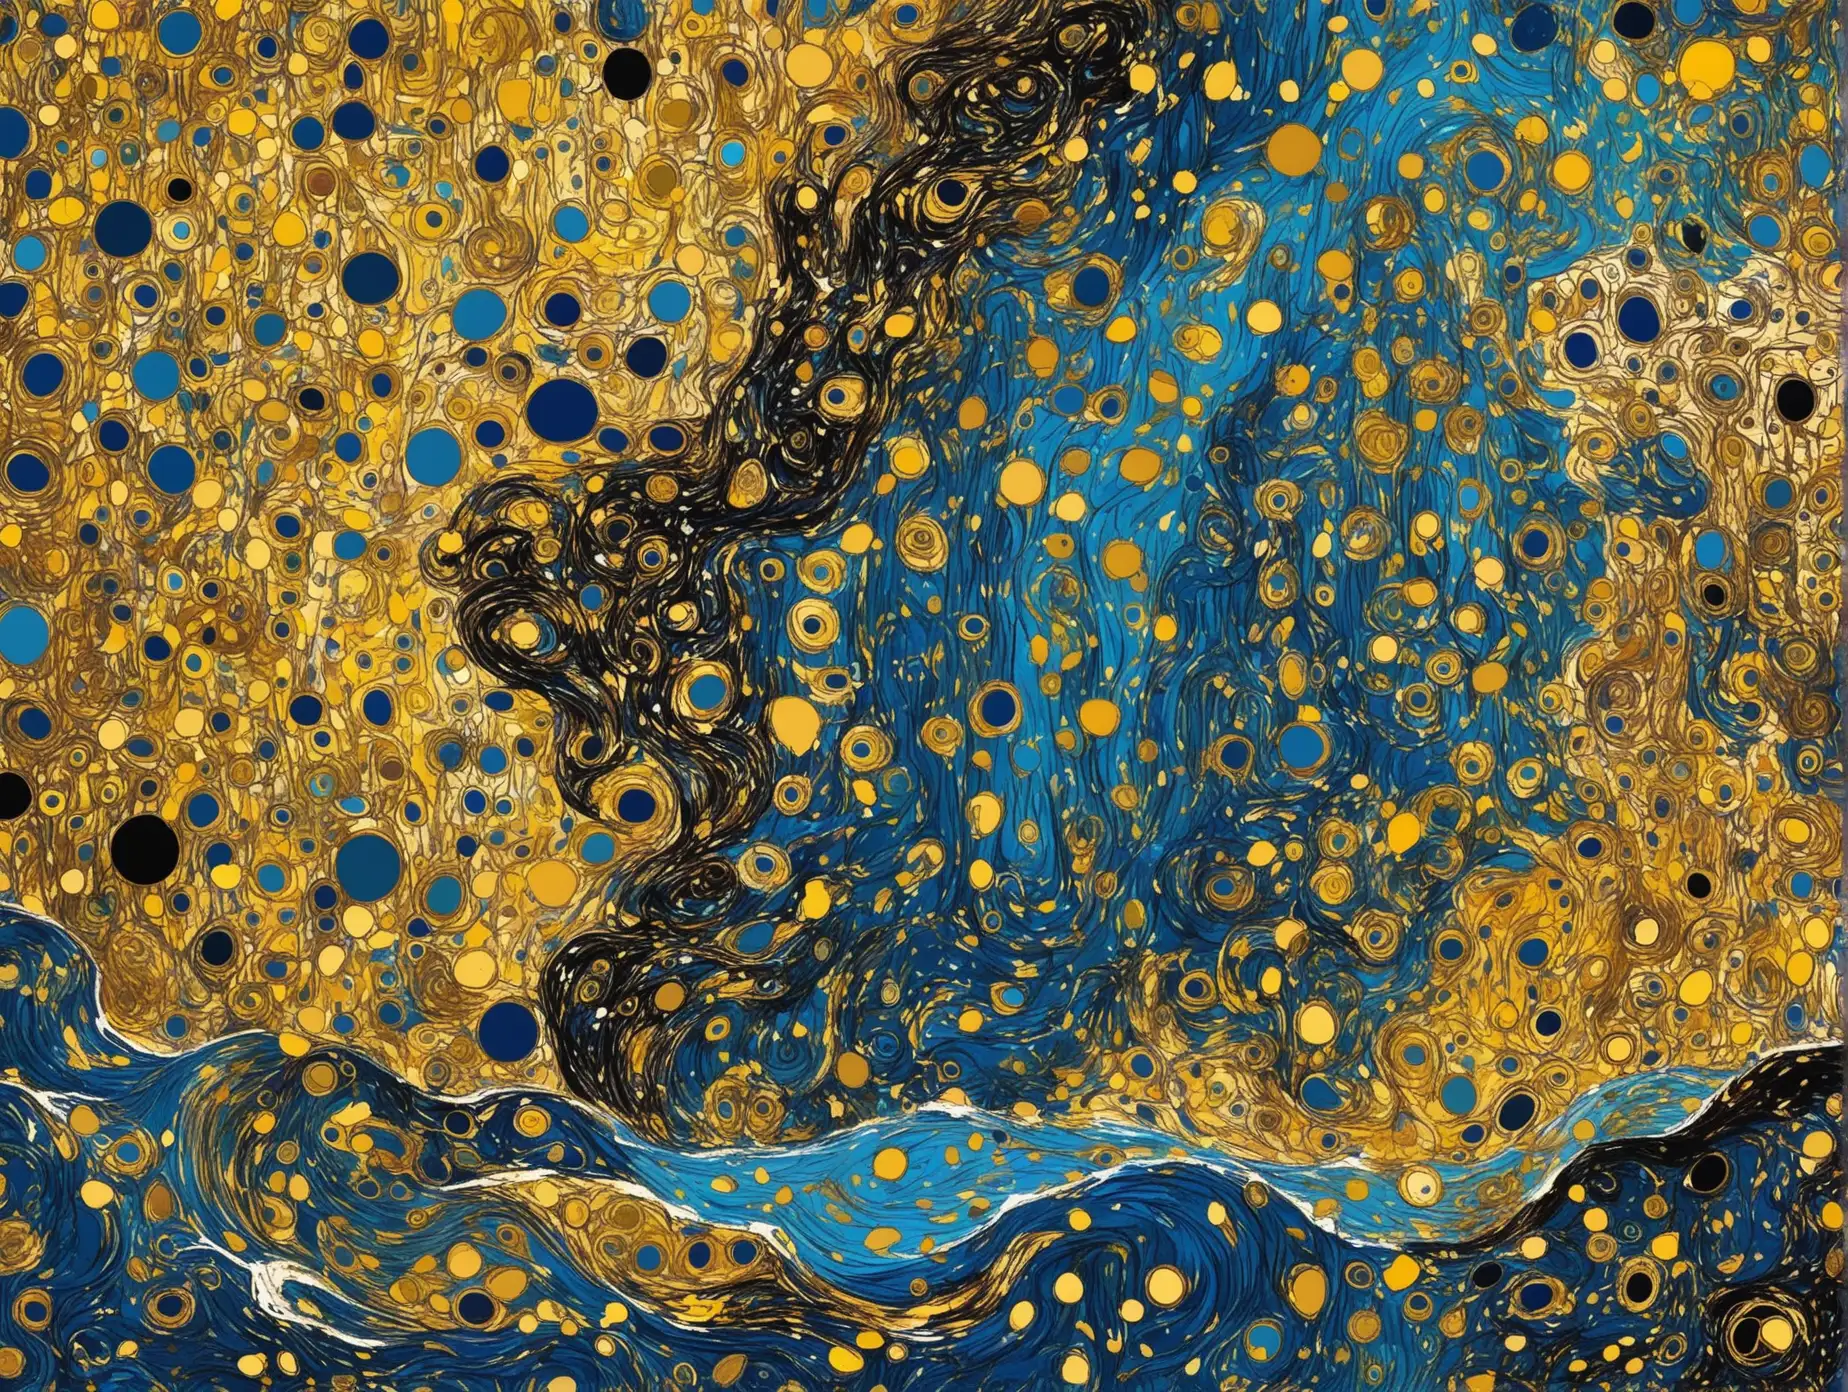 Vibrant Sea Psychedelic Fusion of Klimt and Pollock with Gold and Blue Accents